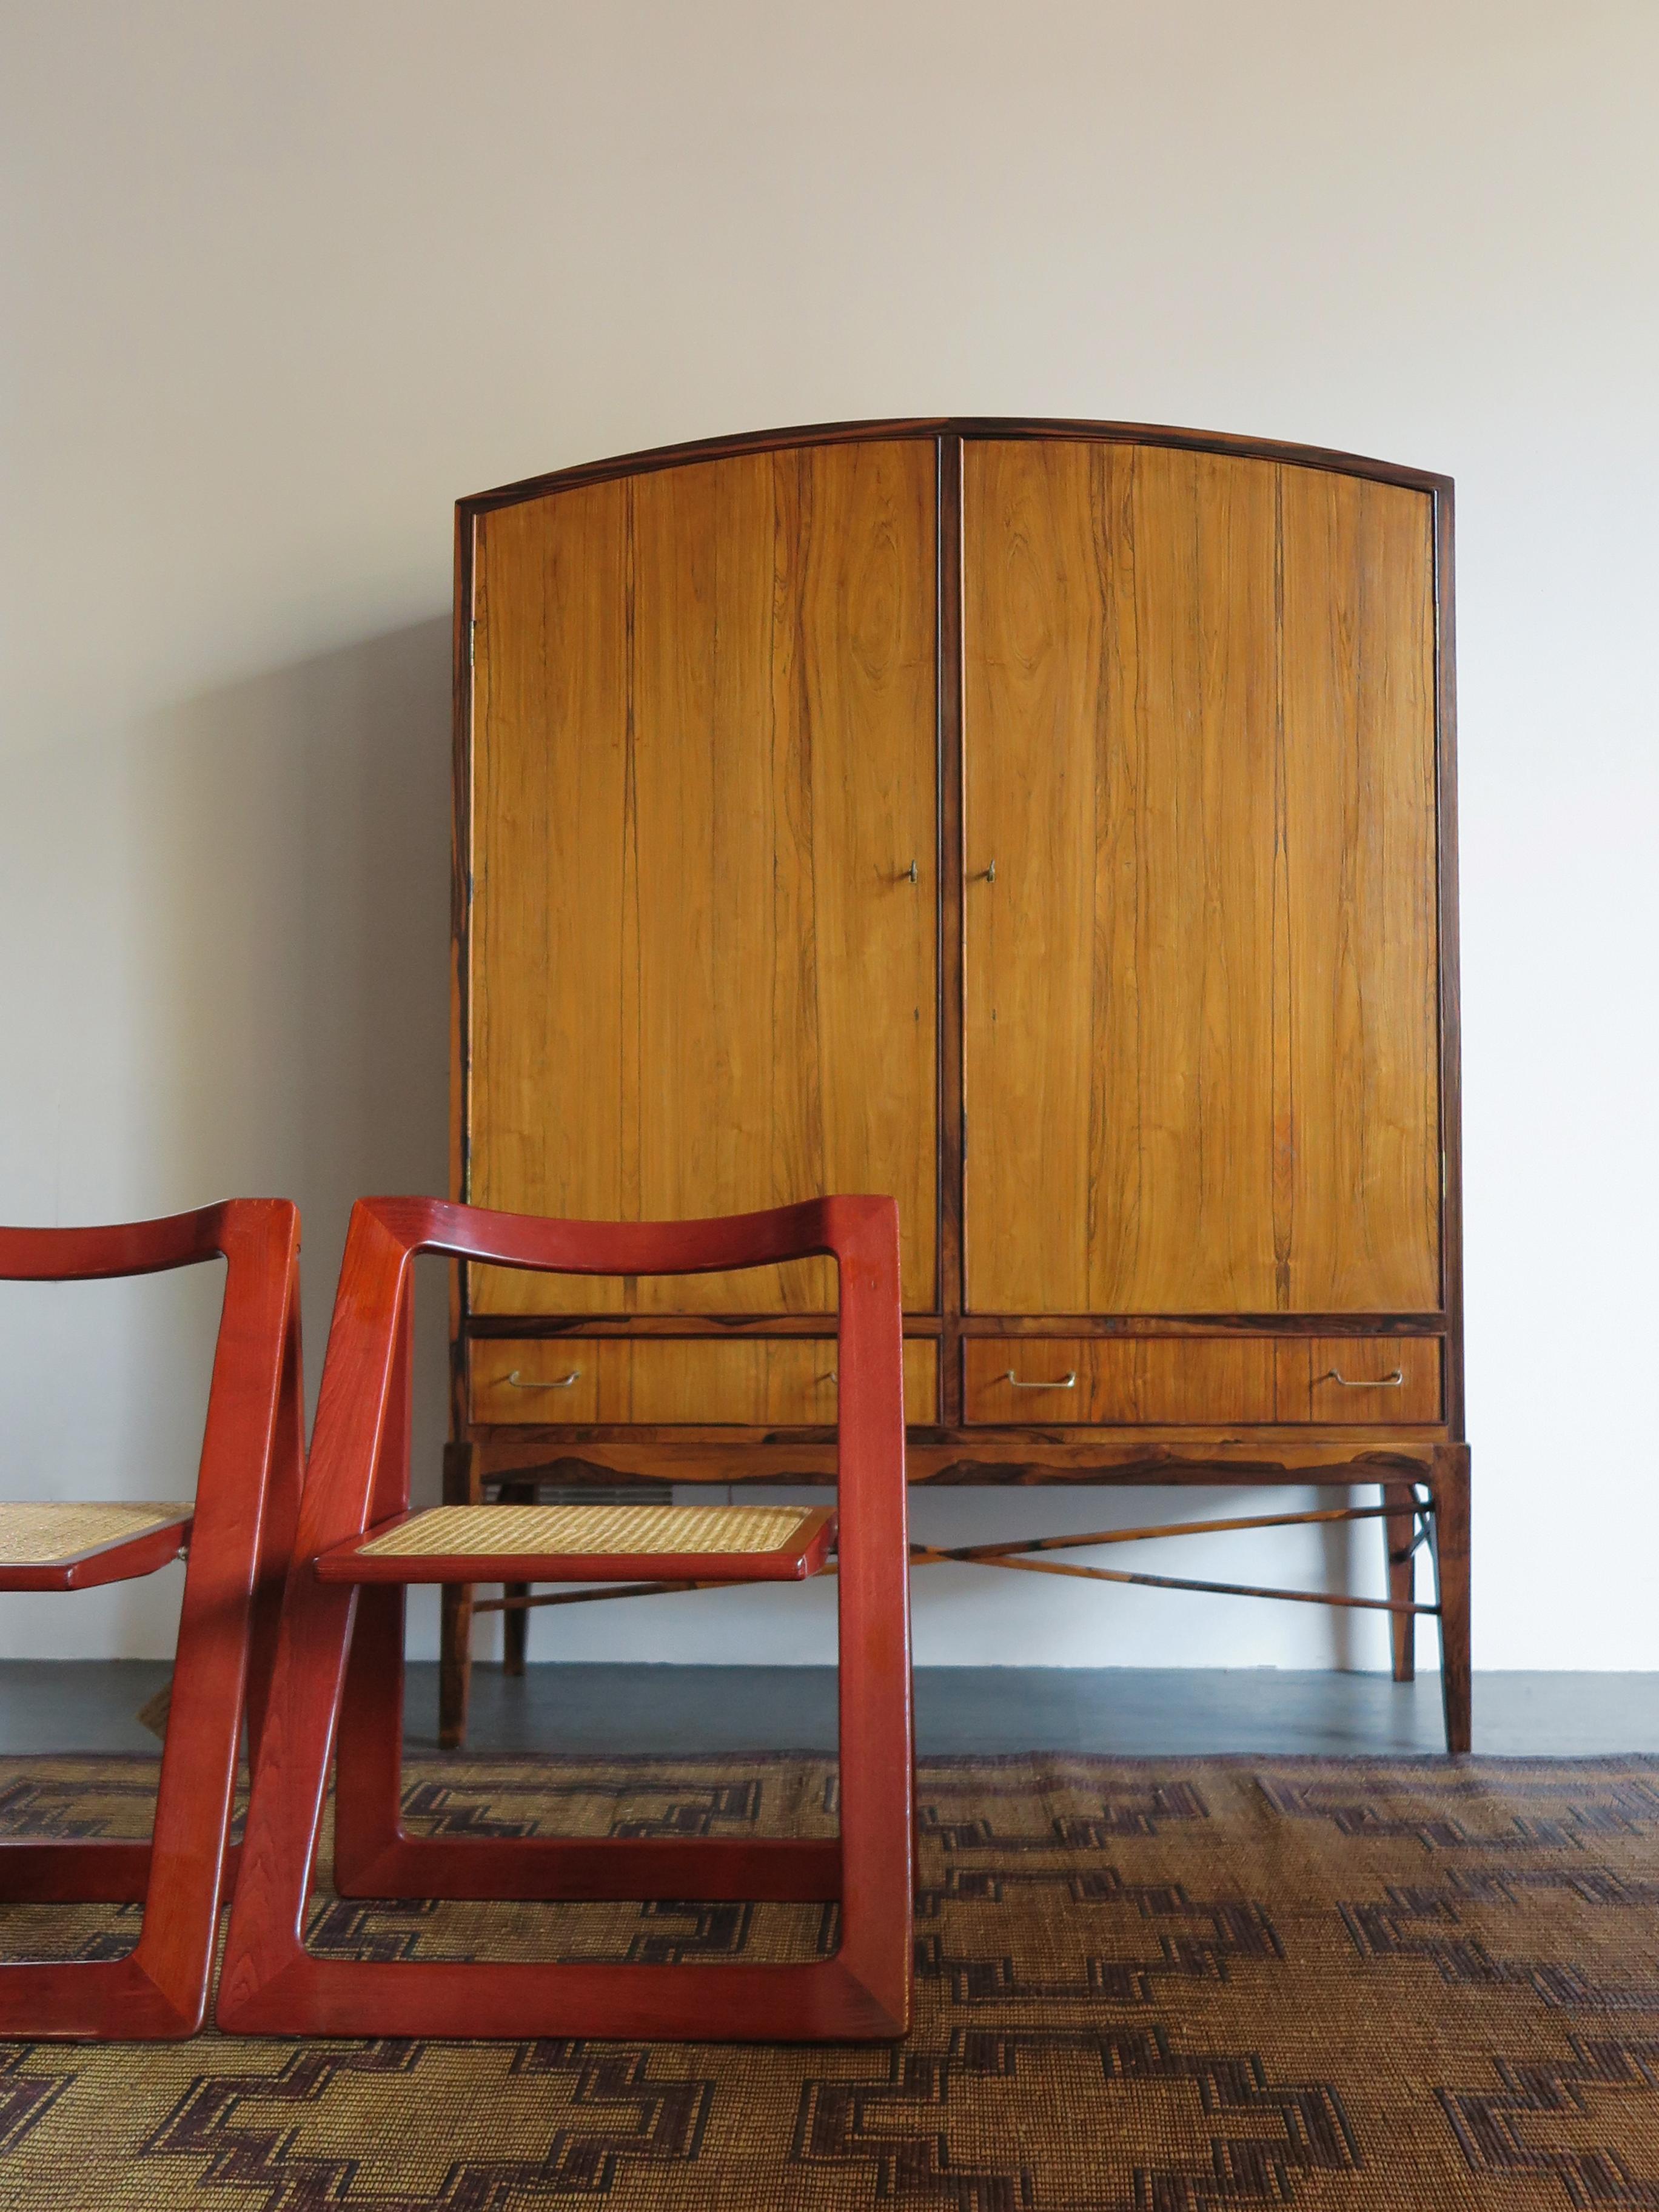 Tan France Auction Pick

Mid-century Scandinavian elegant e very raffinate dark wood cabinet with interior shelves and height-adjustable drawers, Danish manufacture 1960s

The wood has beautifully patterned grains as the photographs show, and the